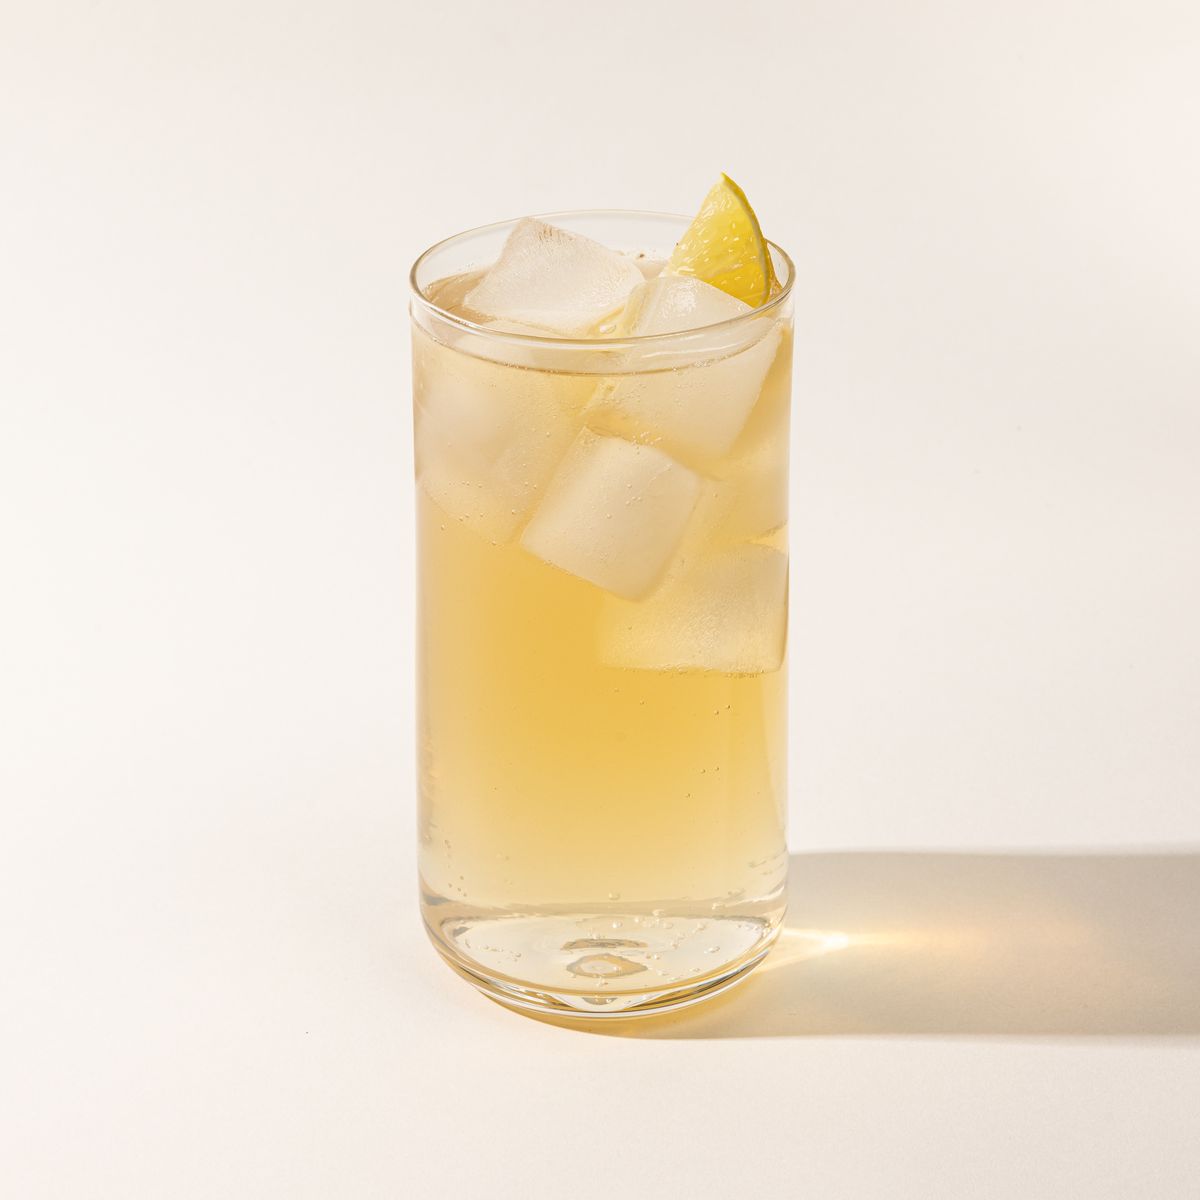 A straight walled tall glass cup with a yellow cocktail and lemon garnish.